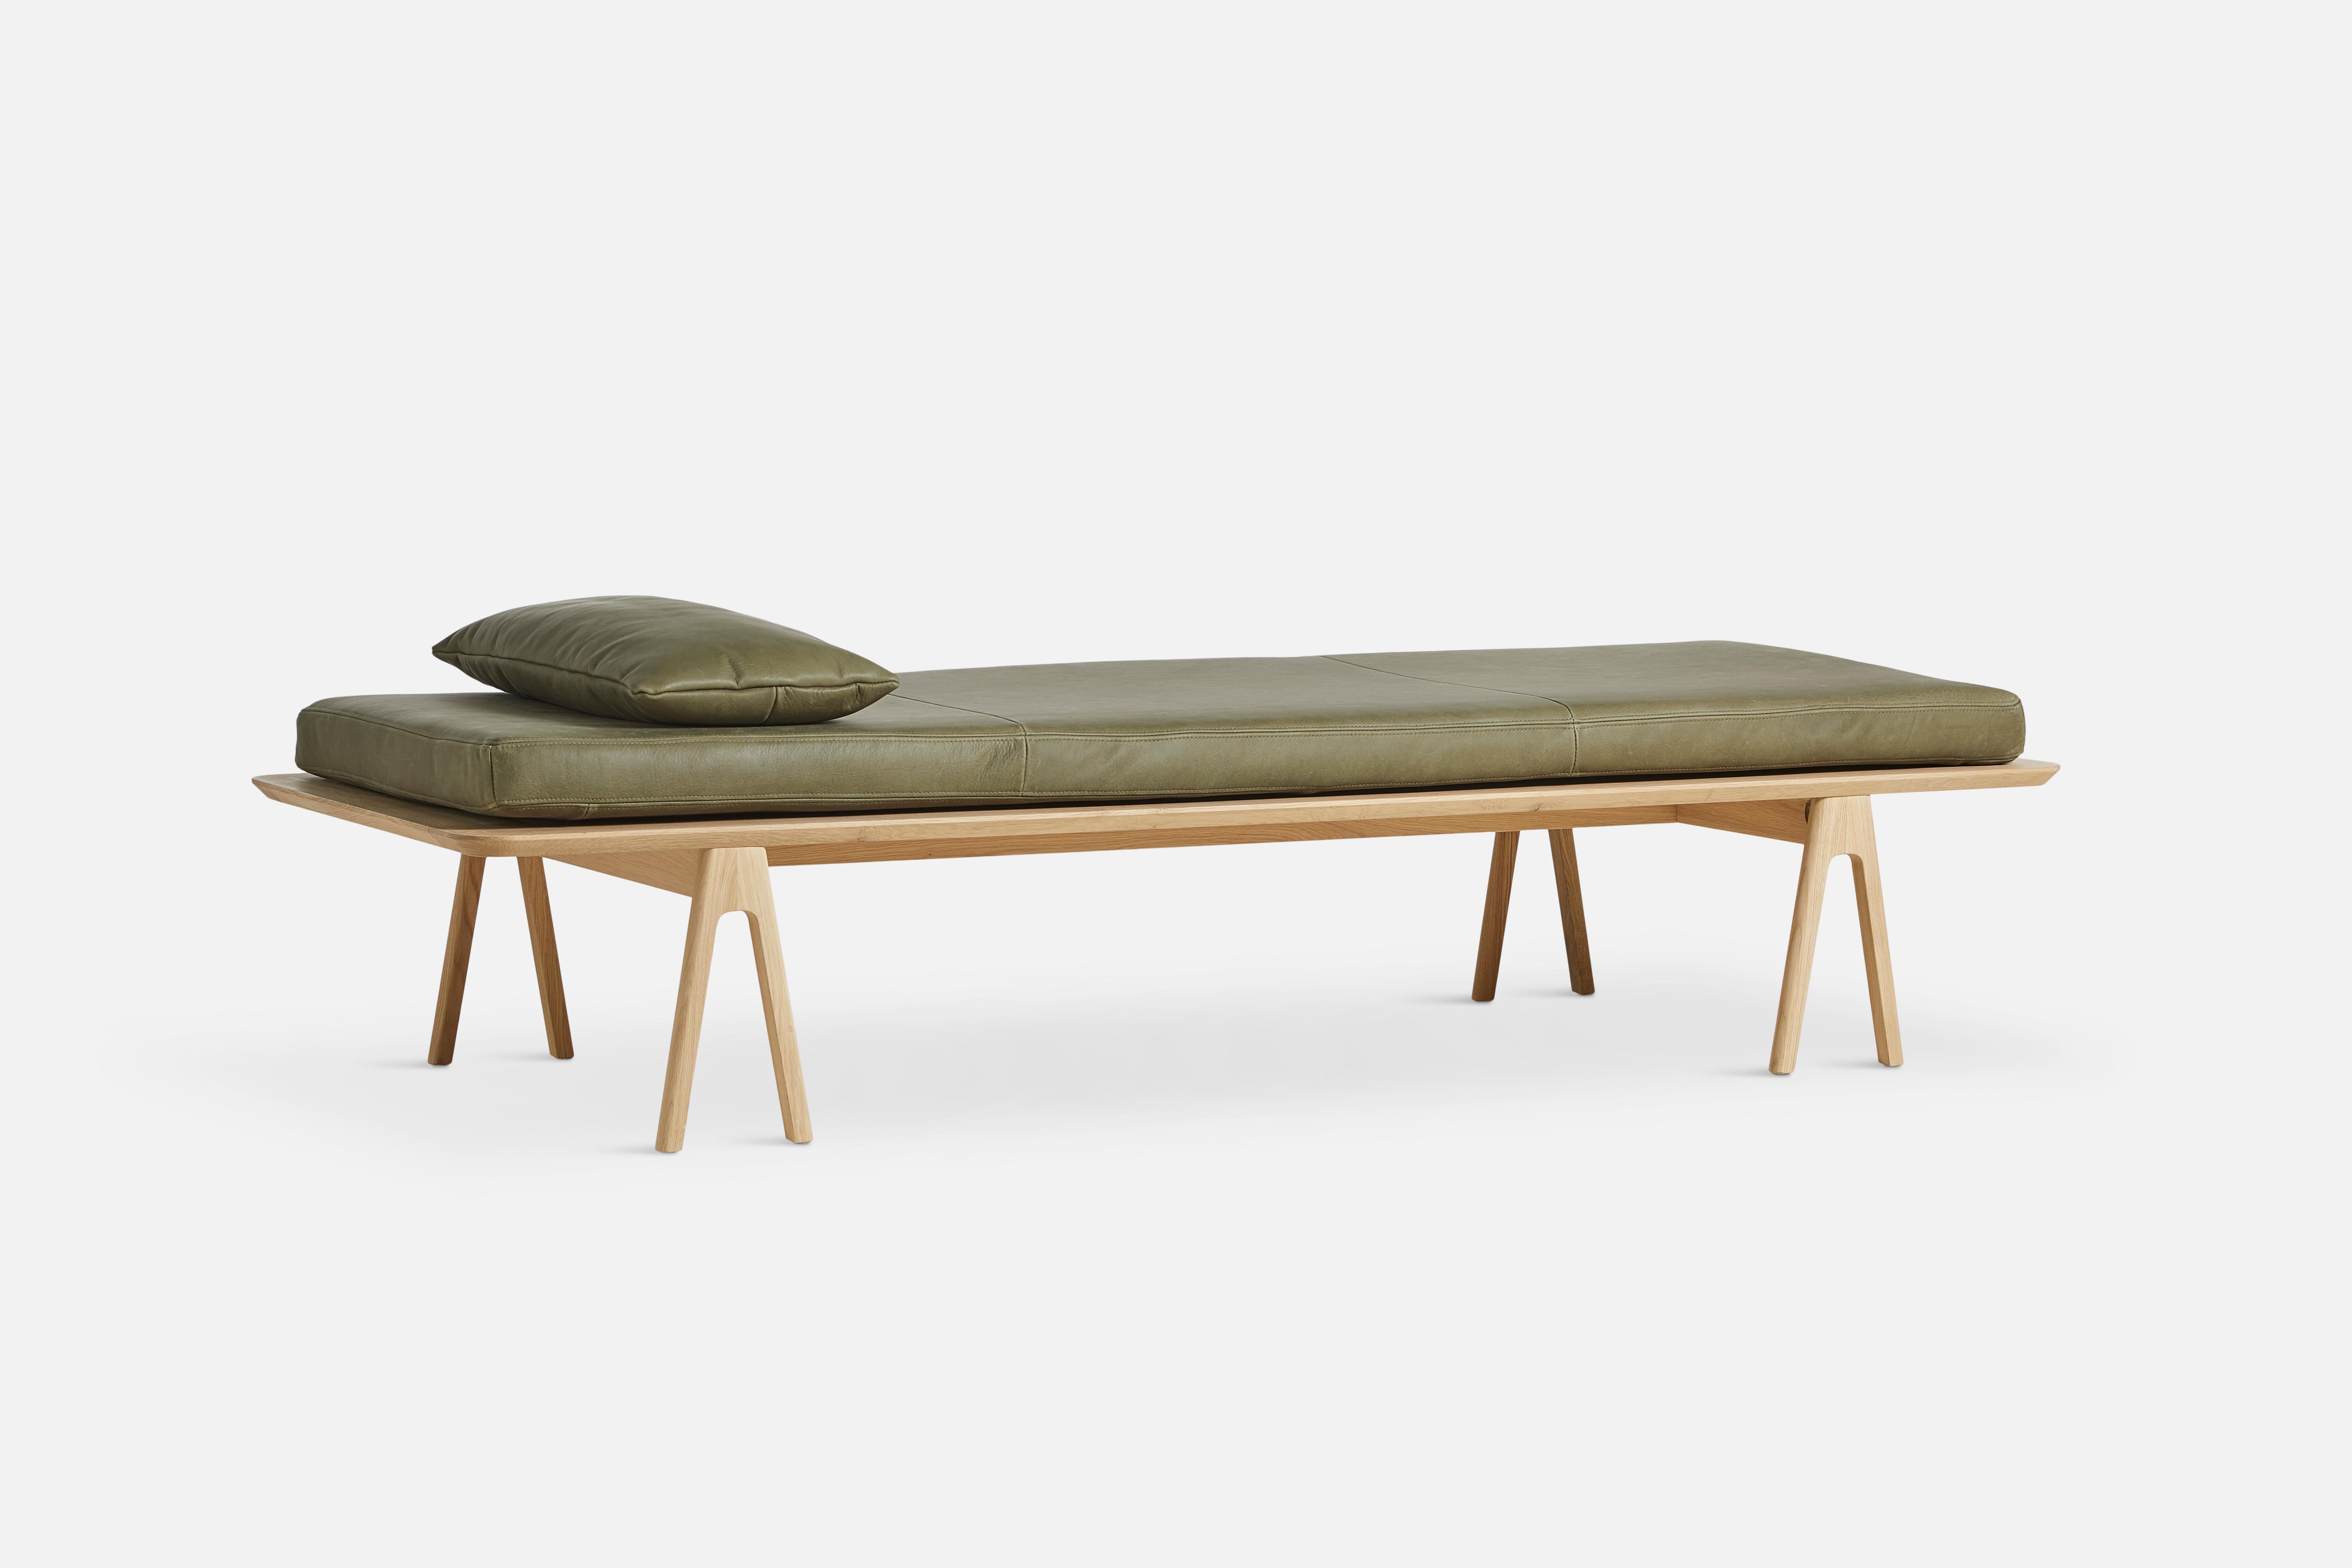 Moss green oak level daybed by Msds Studio
Materials: Camo Leather, Foam, Oak
Dimensions: D 76.5 x W 190 x H 41 cm // D 23.5 x W 67 x H 8.5 cm

The founders, Mia and Torben Koed, decided to put their 30 years of experience into a new project. It